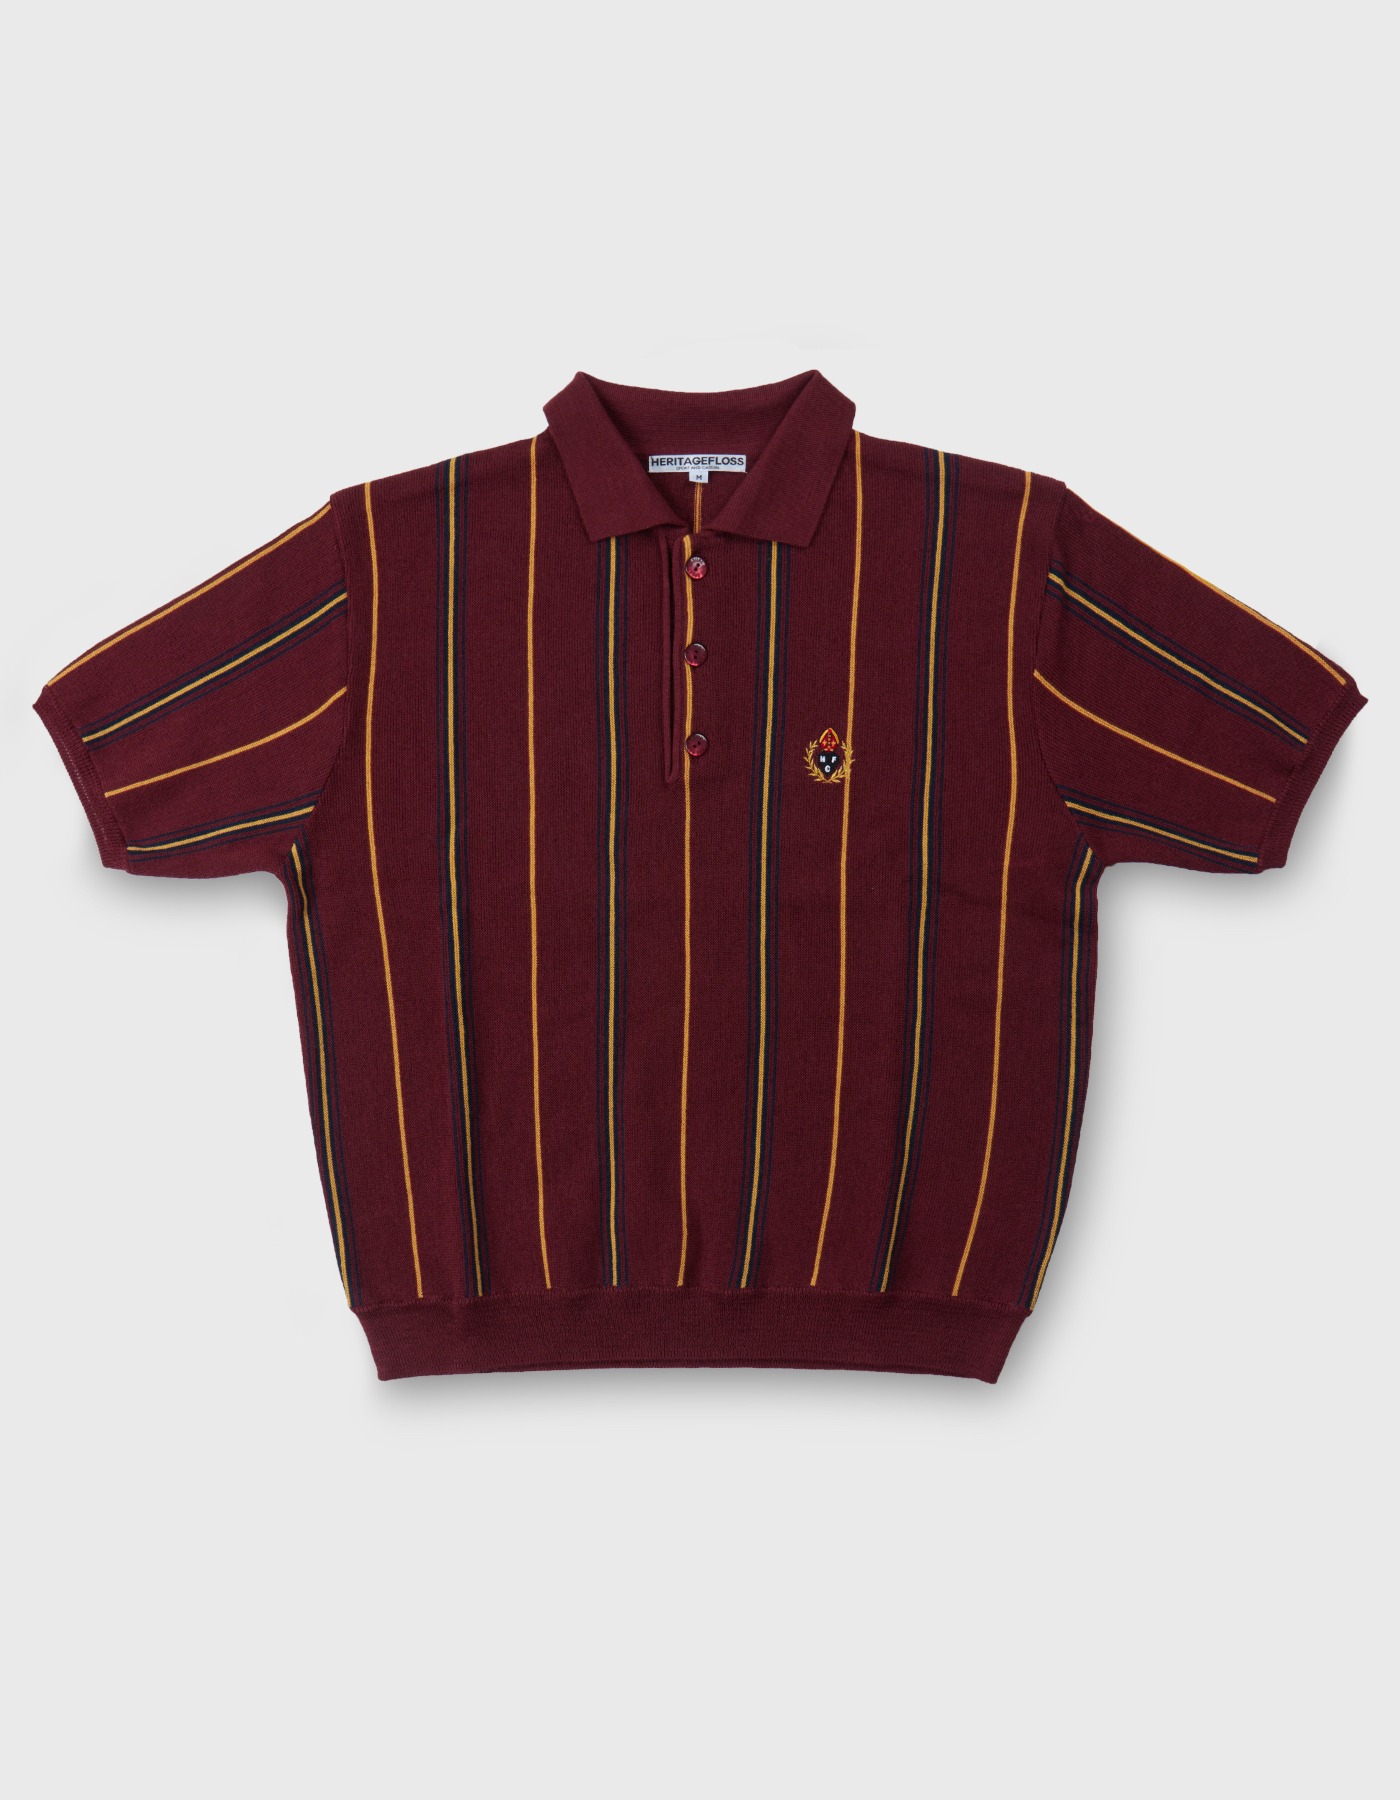 HFC CREST STRIPED POLO SHIRT / Maroon